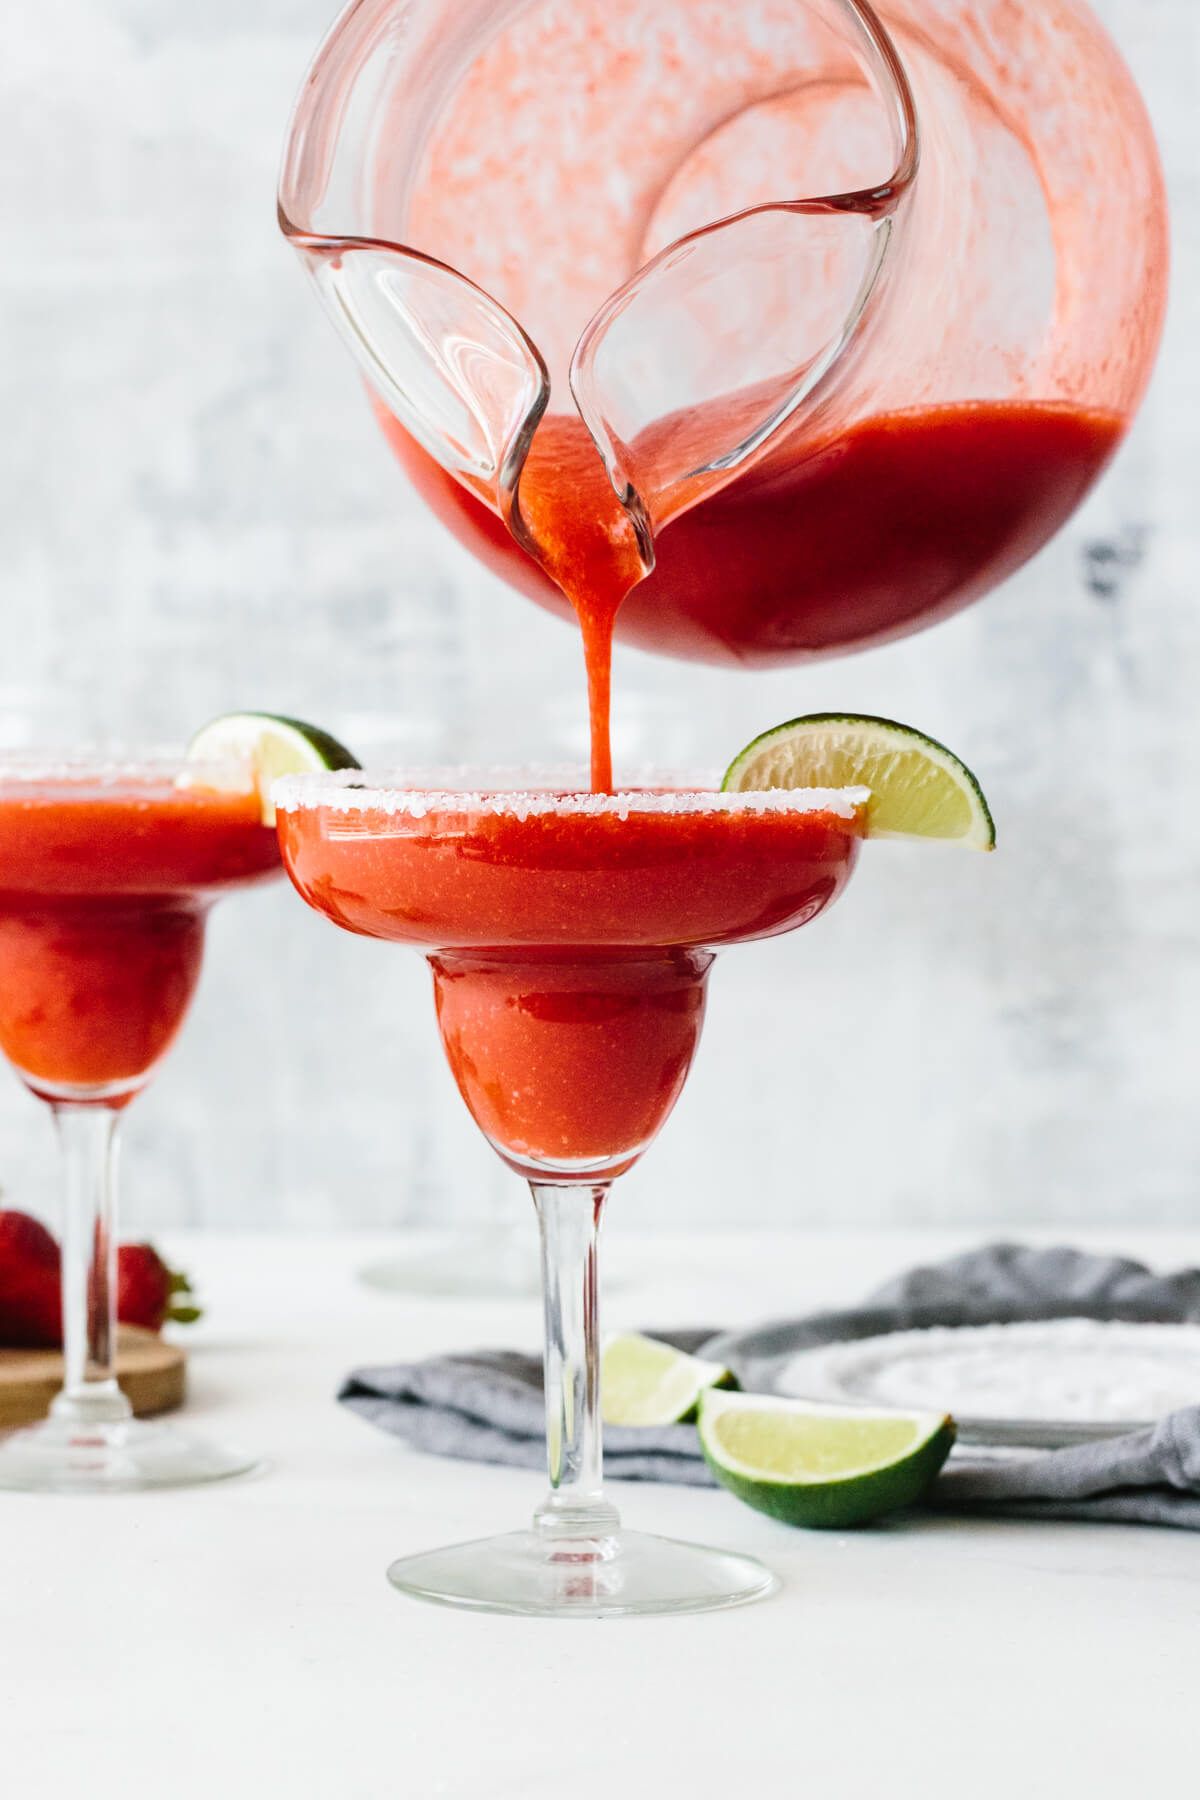 Pouring strawberry margarita into a glass.